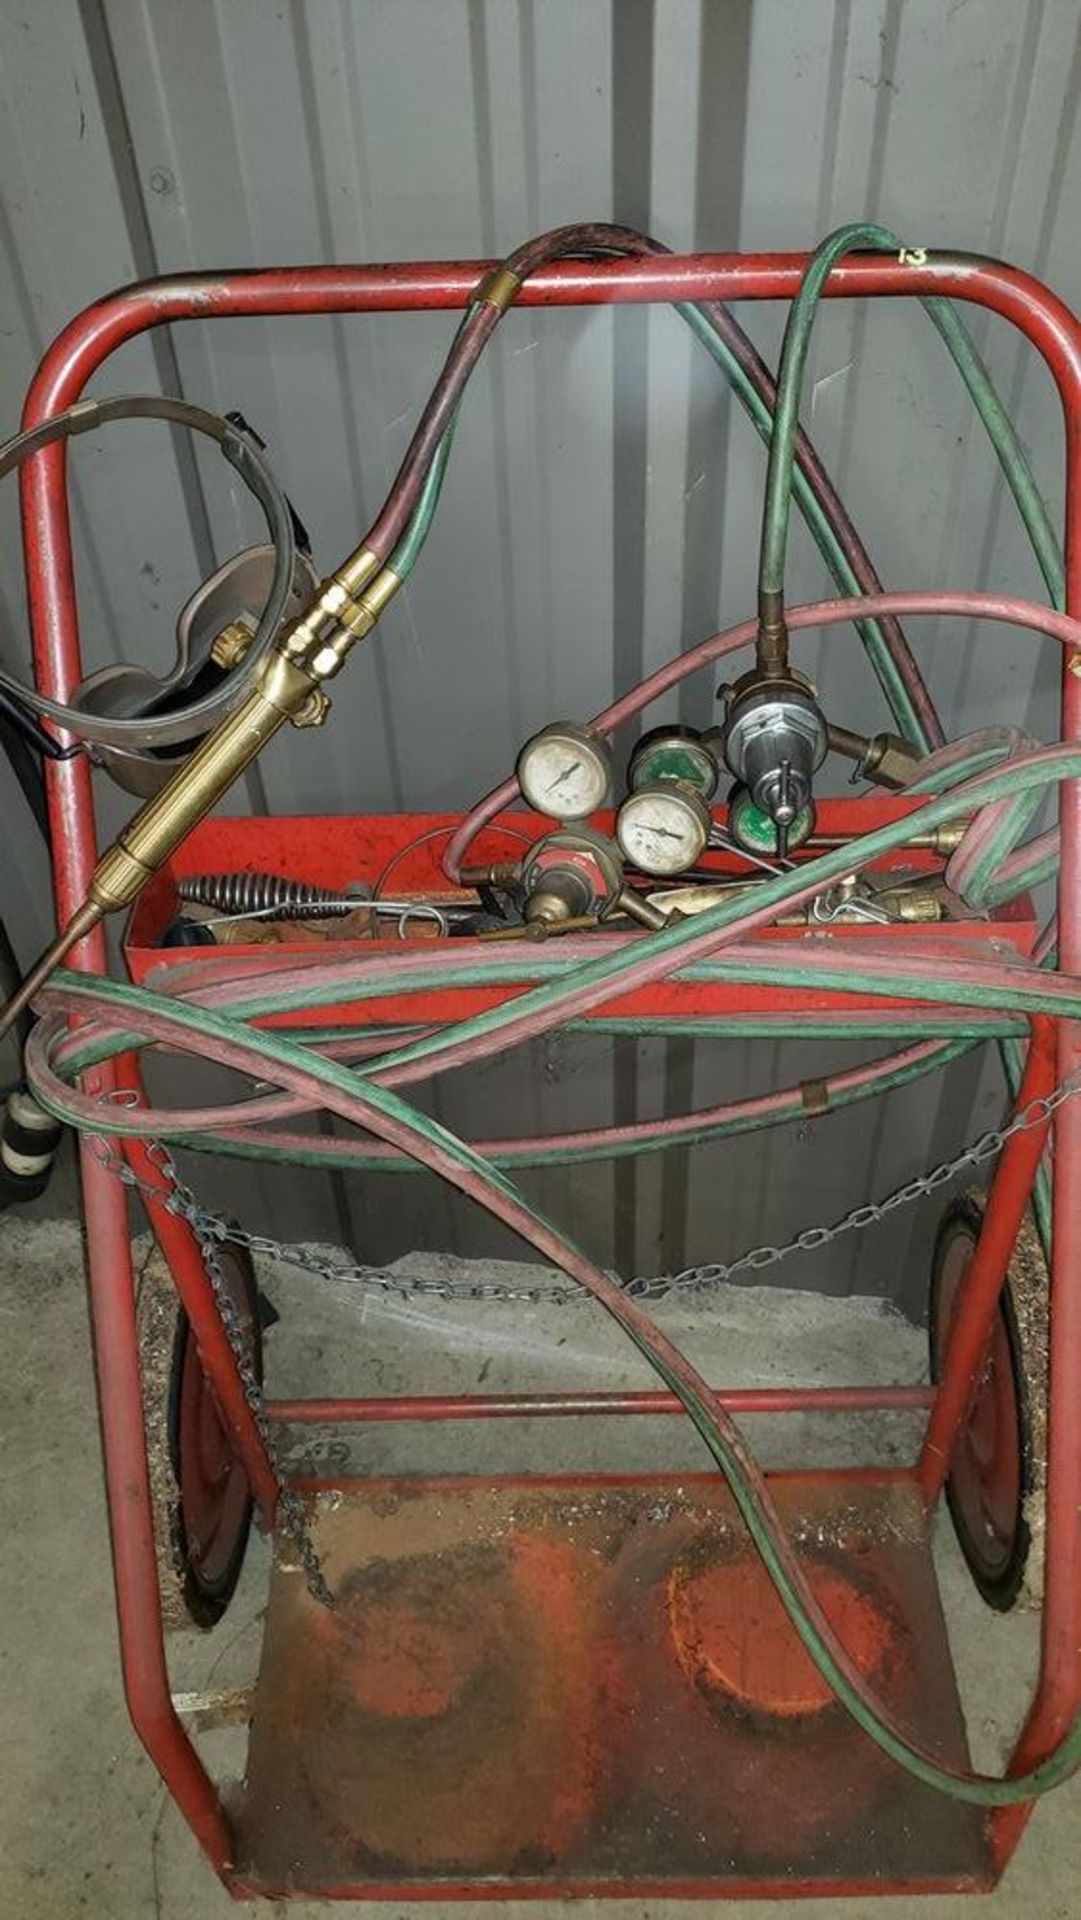 Welding Cart with Torch and Gauges